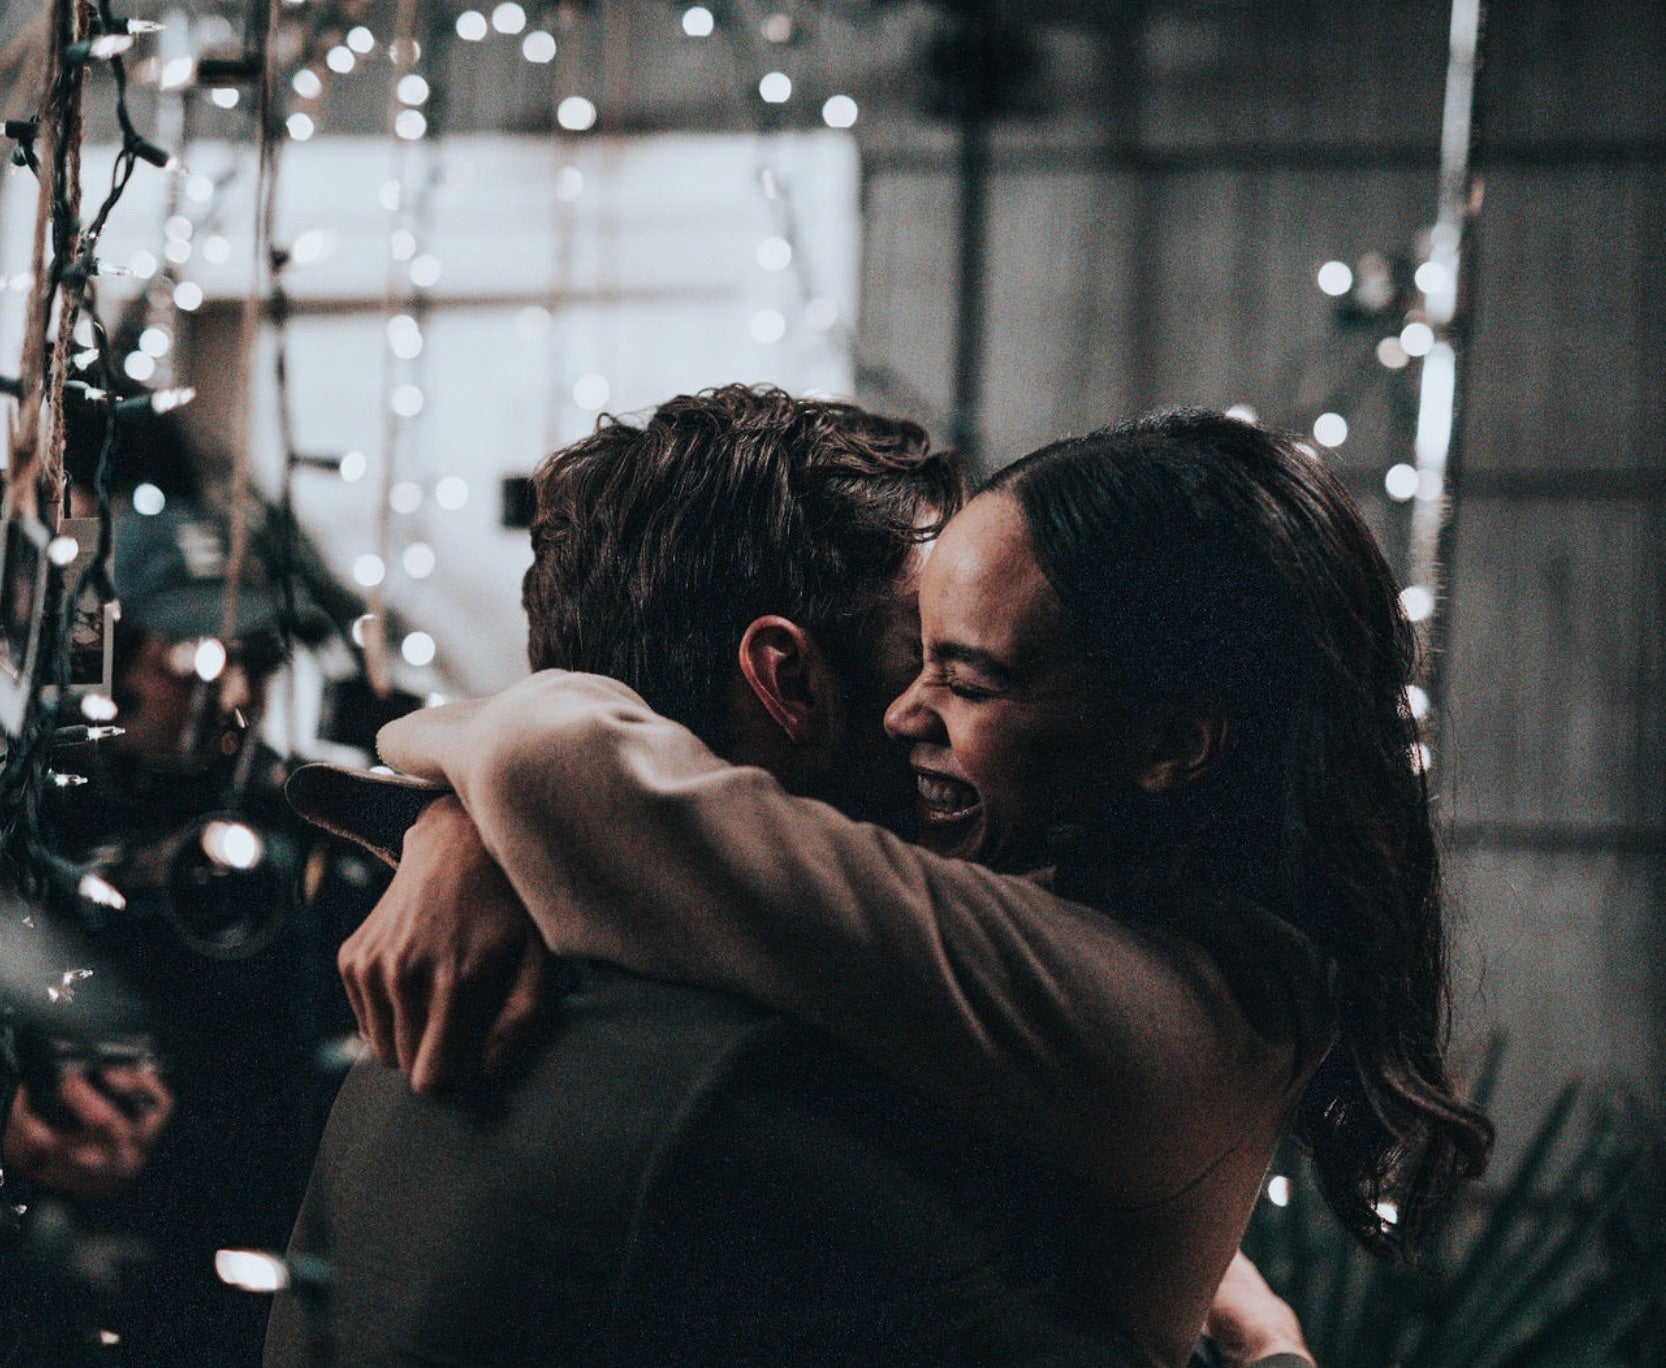 Couple sharing a hug under sparkly lights